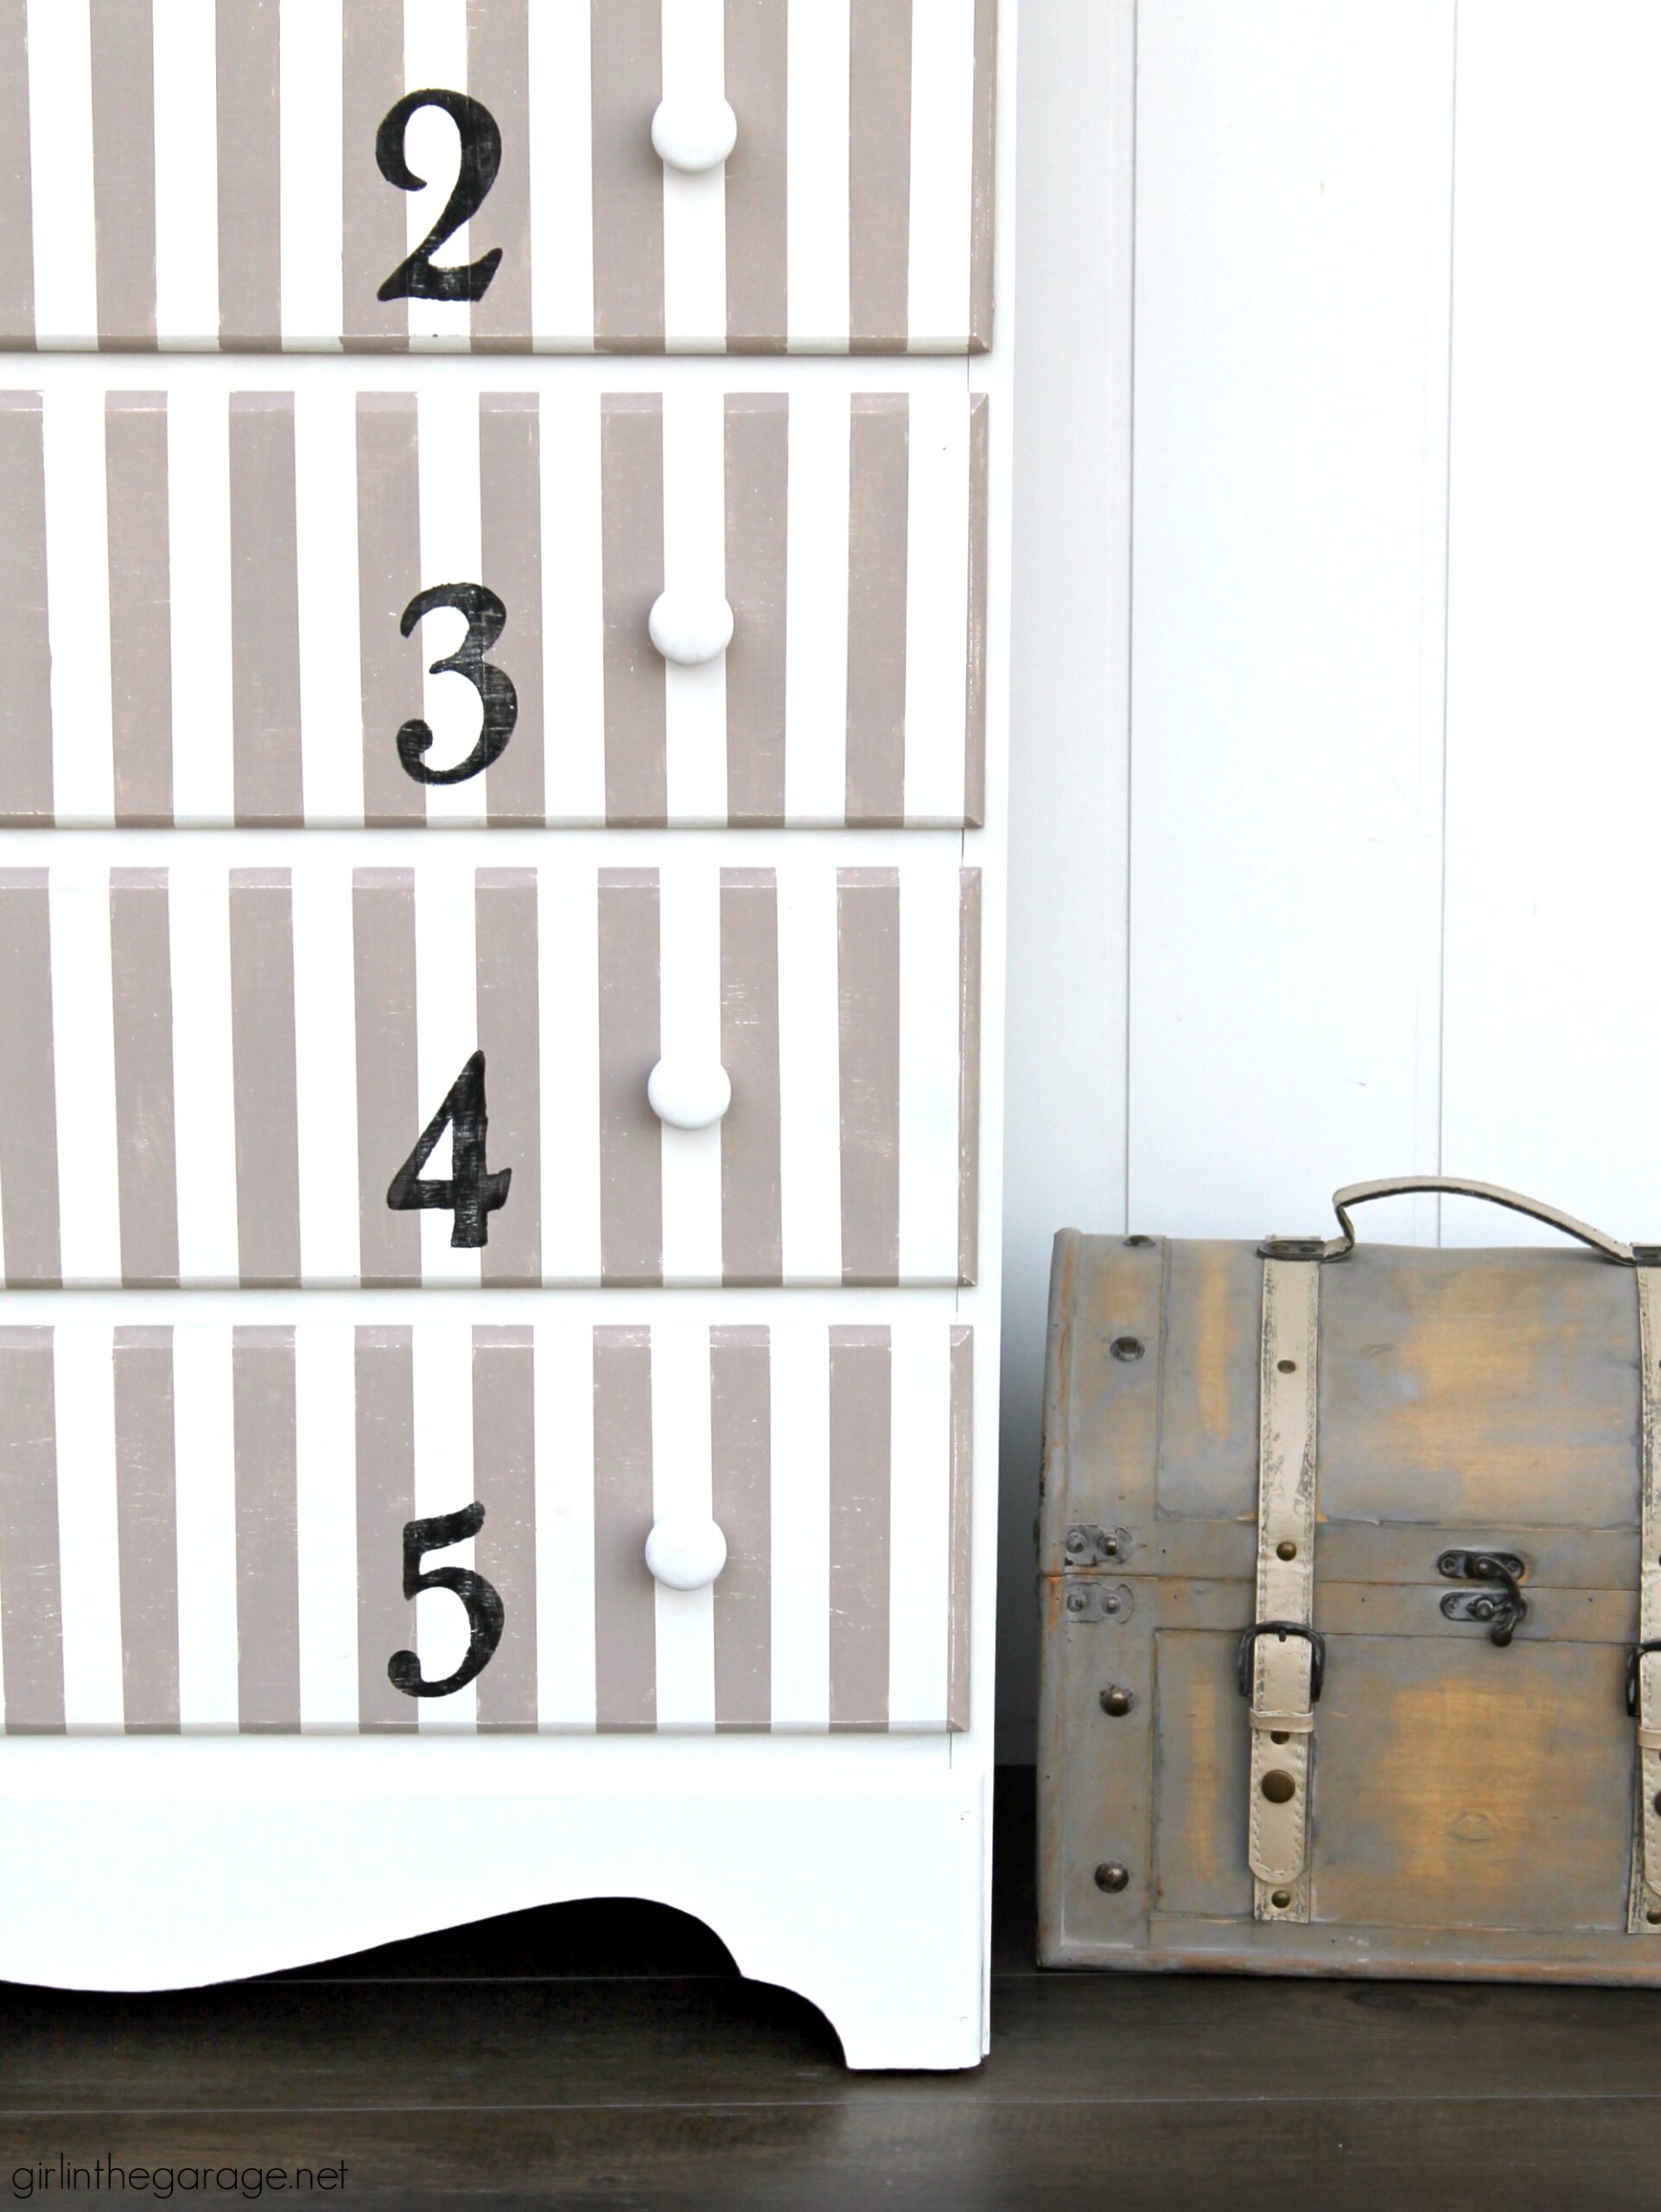 Give old furniture lots of charm with painted stripes and numbers. Learn how to easily paint stripes on a dresser with tape and a high quality Purdy paint brush. #ad DIY painted furniture ideas by Girl in the Garage